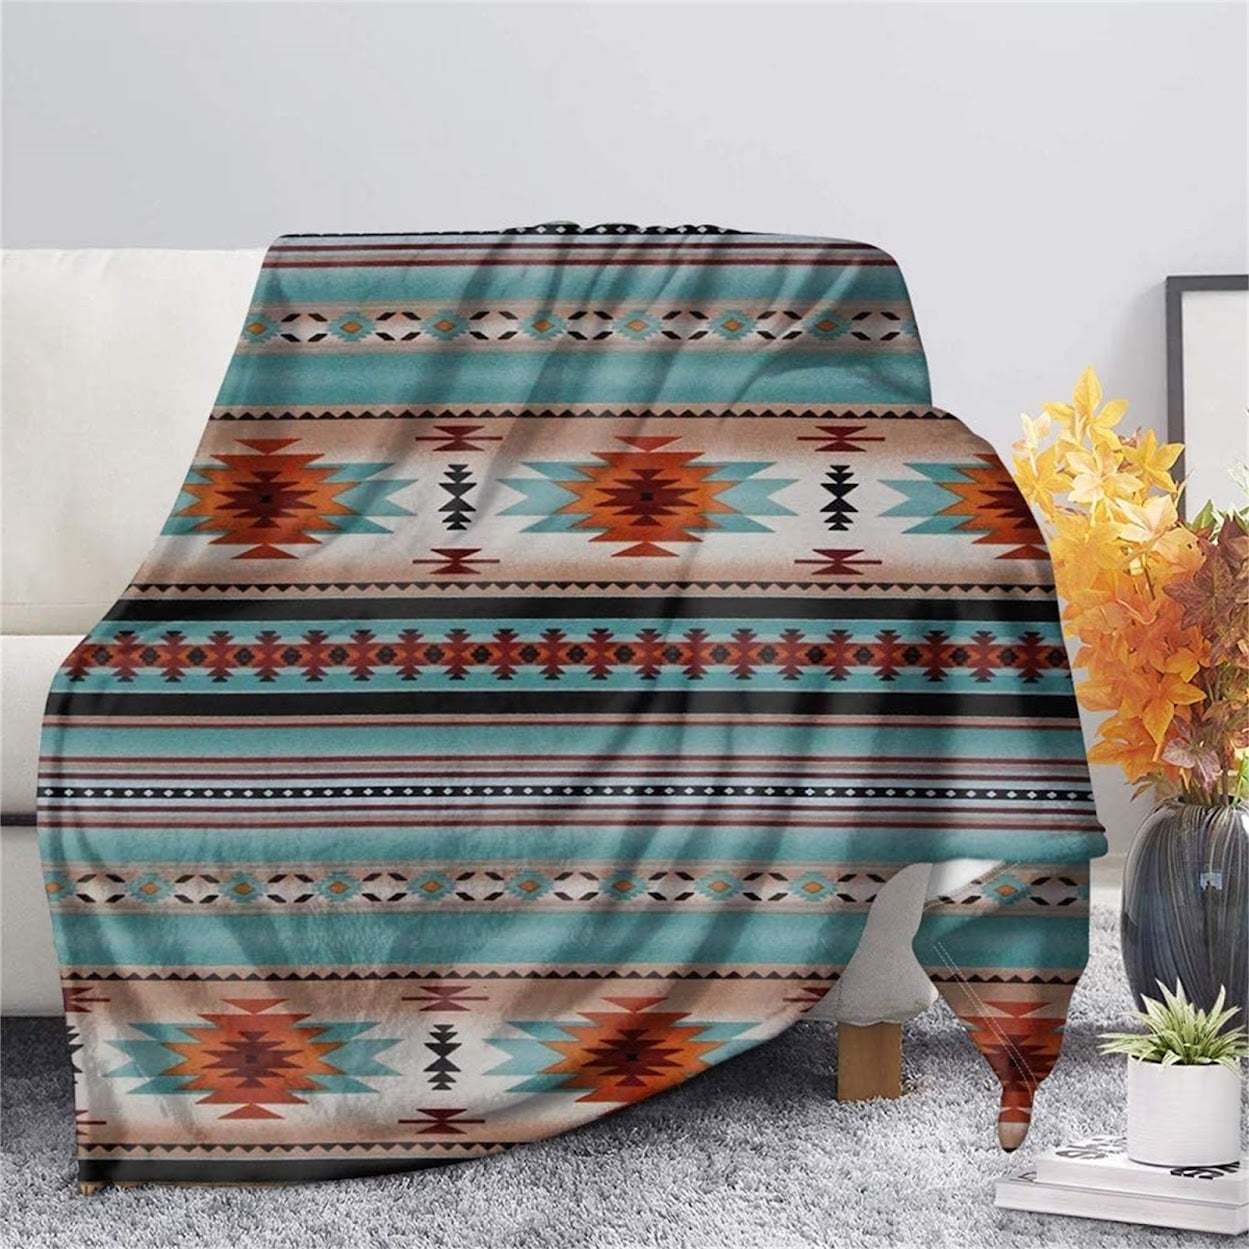 Flowers Blanket Luxury Sofa Throw Blanket Flannel Bed Blanket for Home Outdoor Living Room Bedroom Couch